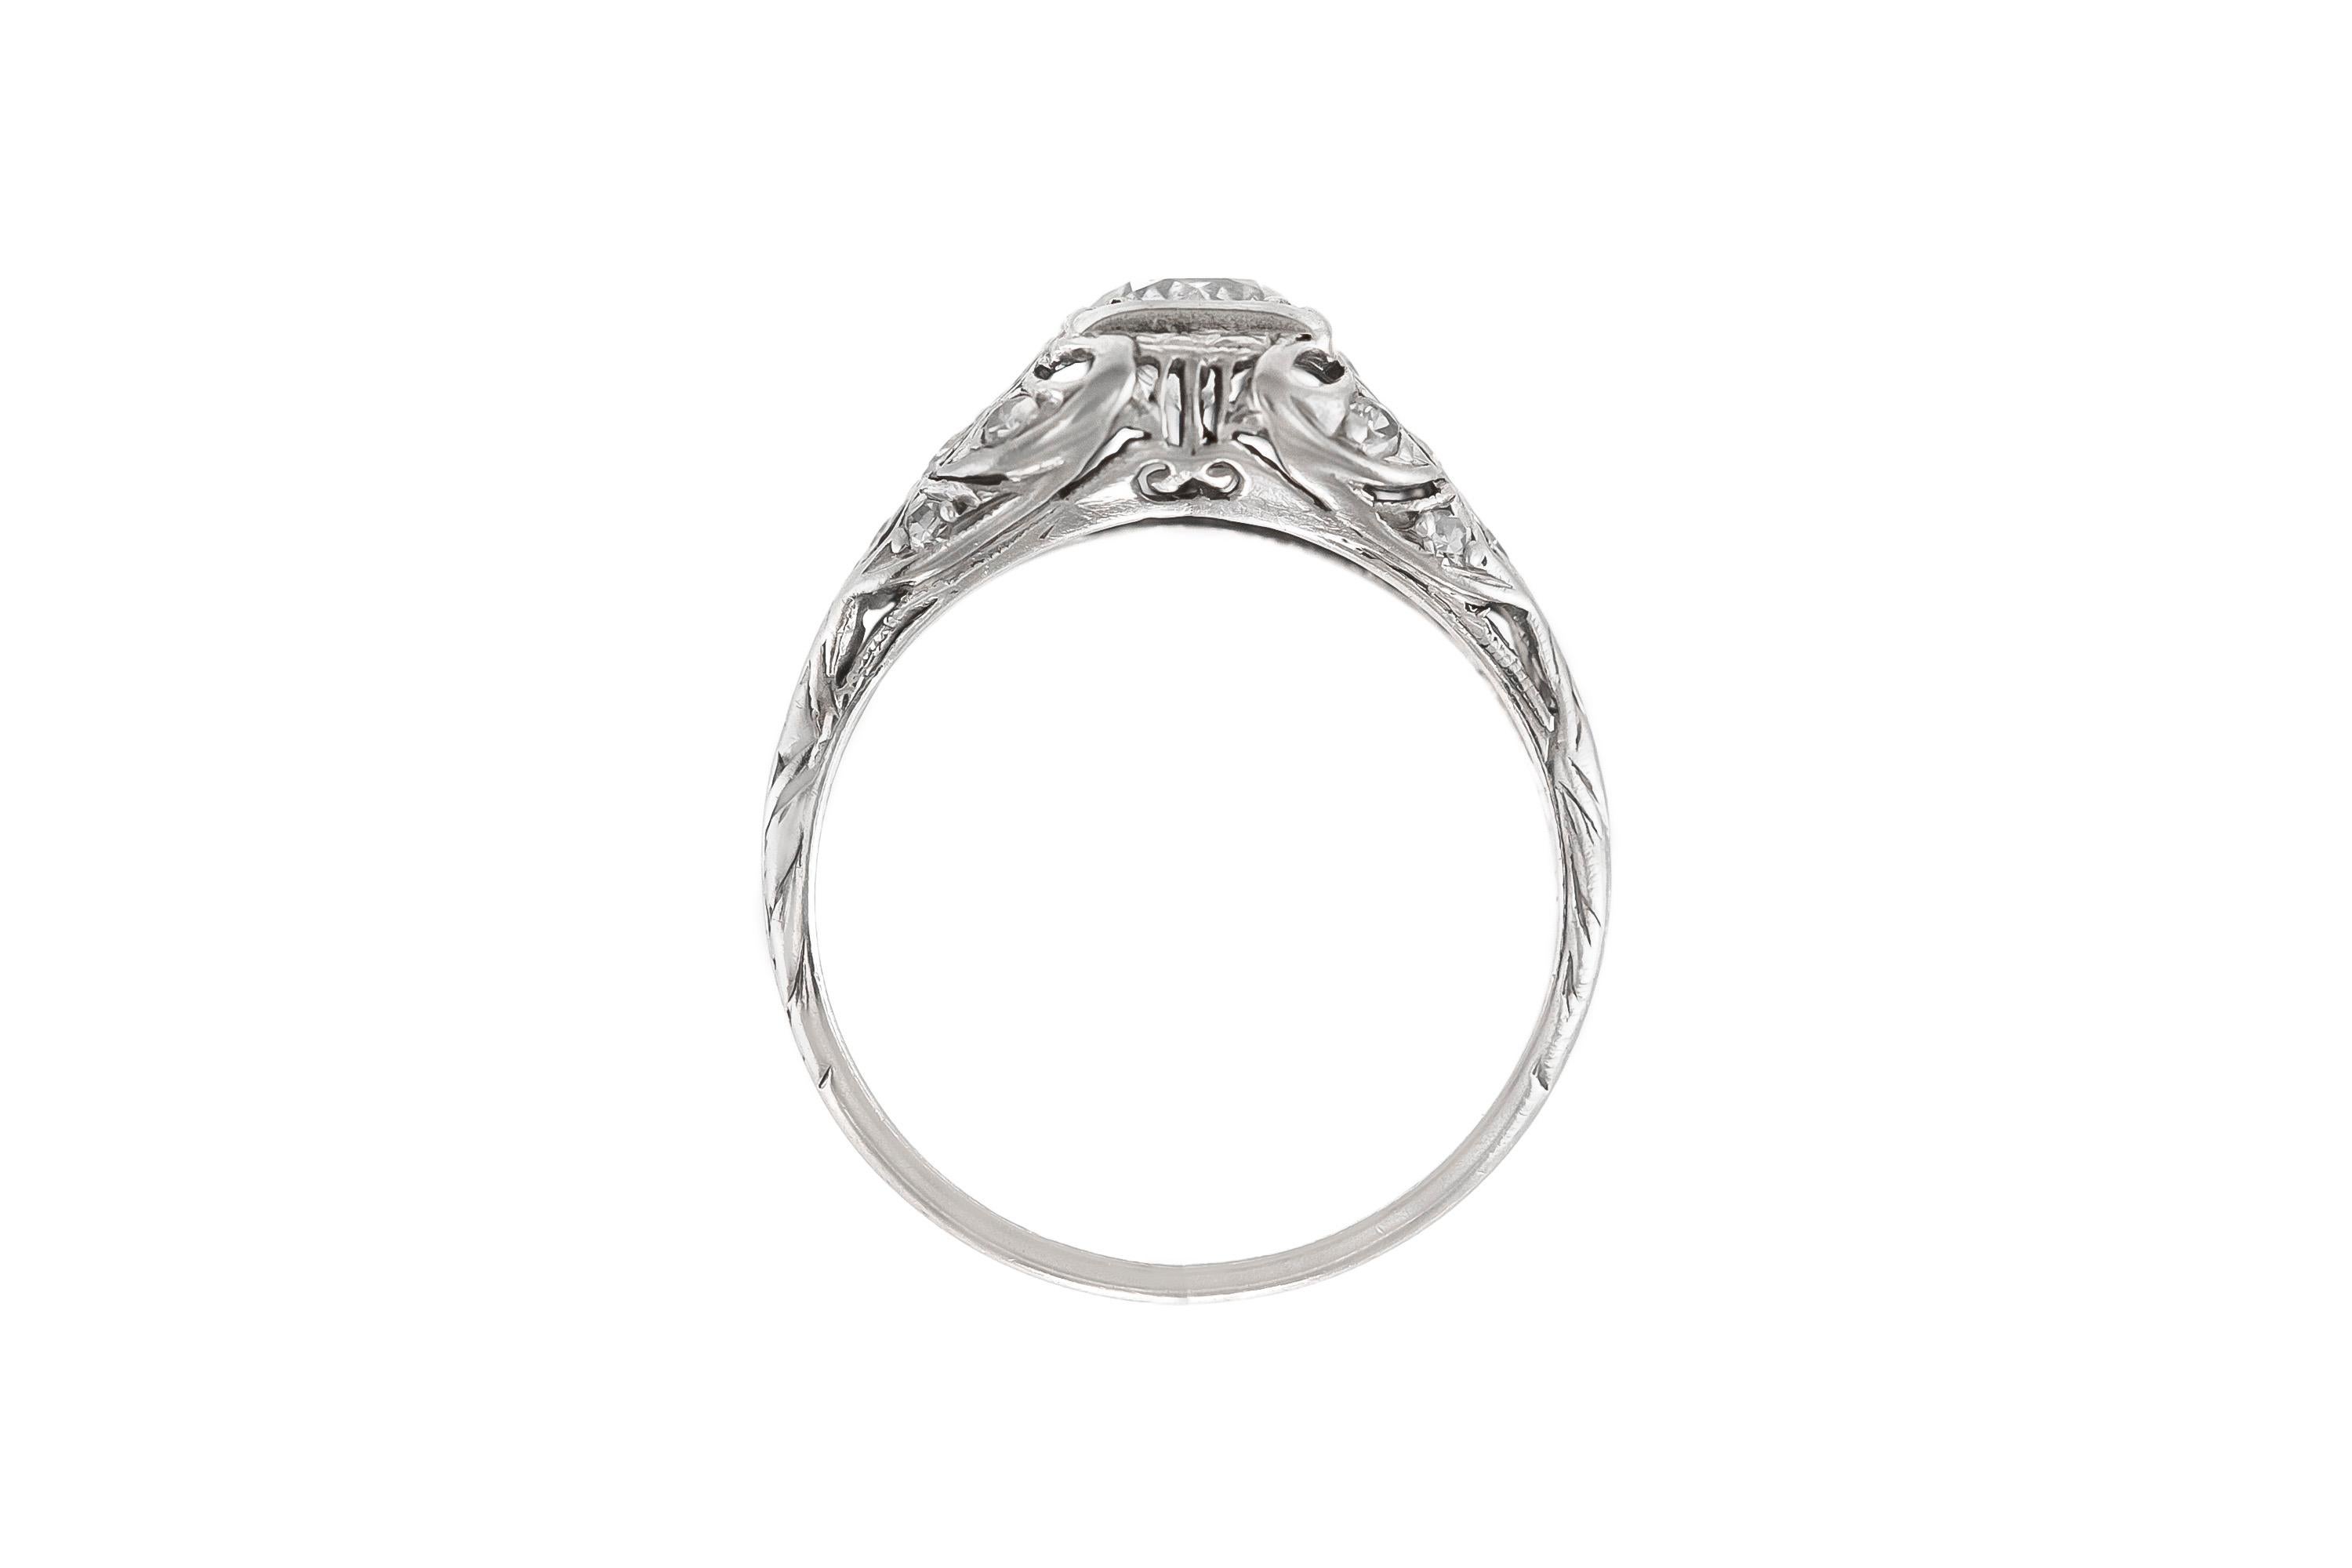 The ring is finely crafted in platinum with center round diamond weighing approximately total of 0.50 carat and around diamonds weighing approximately total of 0.12 carat.
Circa 1930
Easy to resize